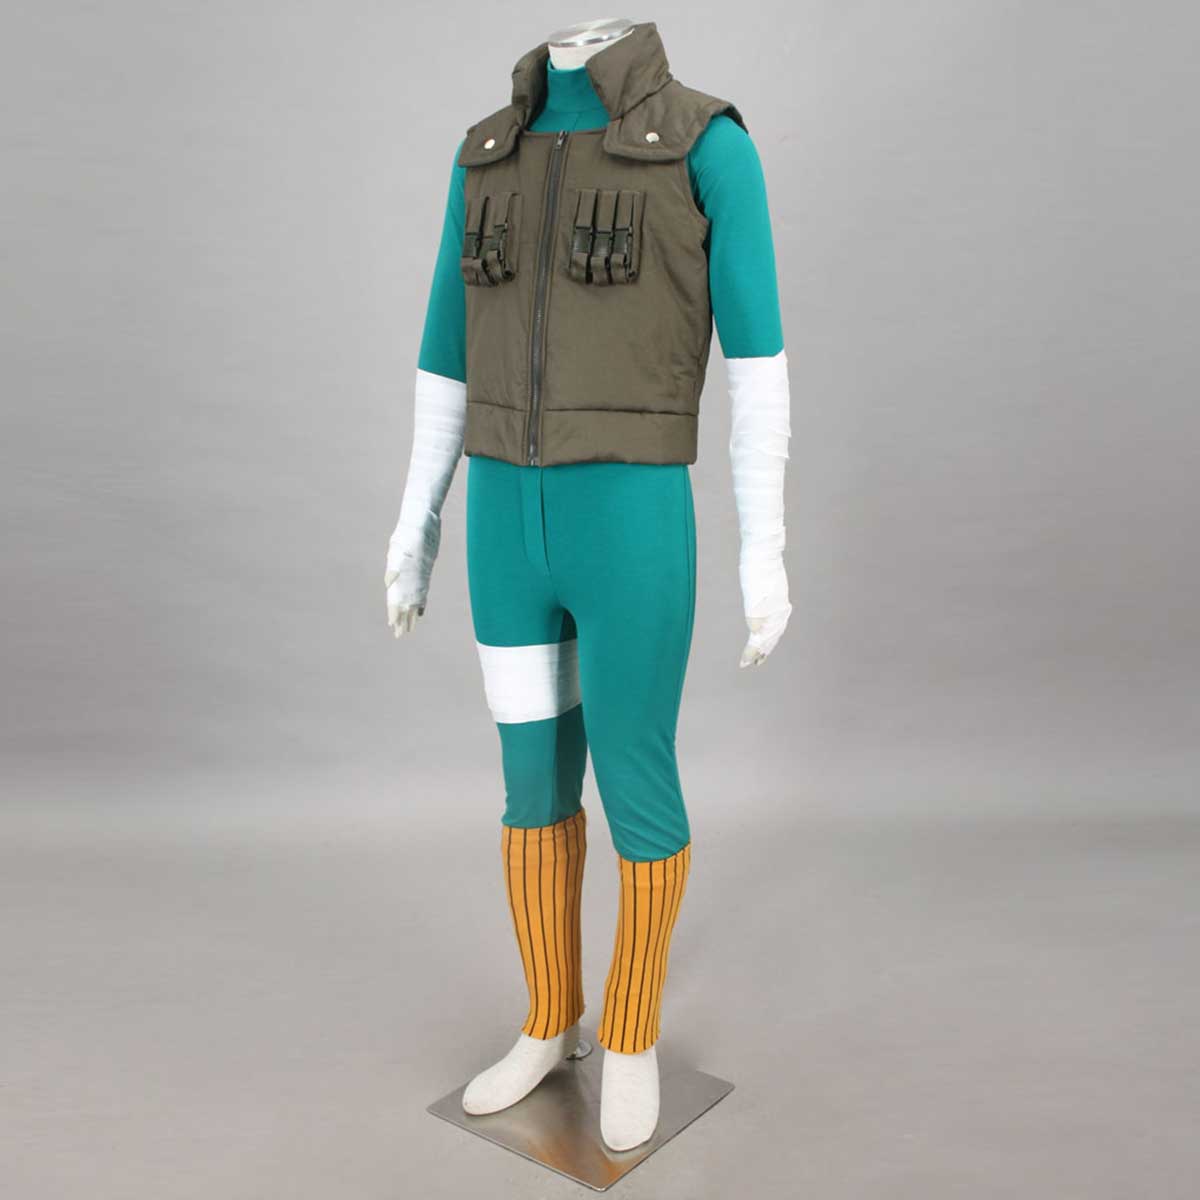 Naruto Shippuden Rock Lee 2 Anime Cosplay Costumes Outfit